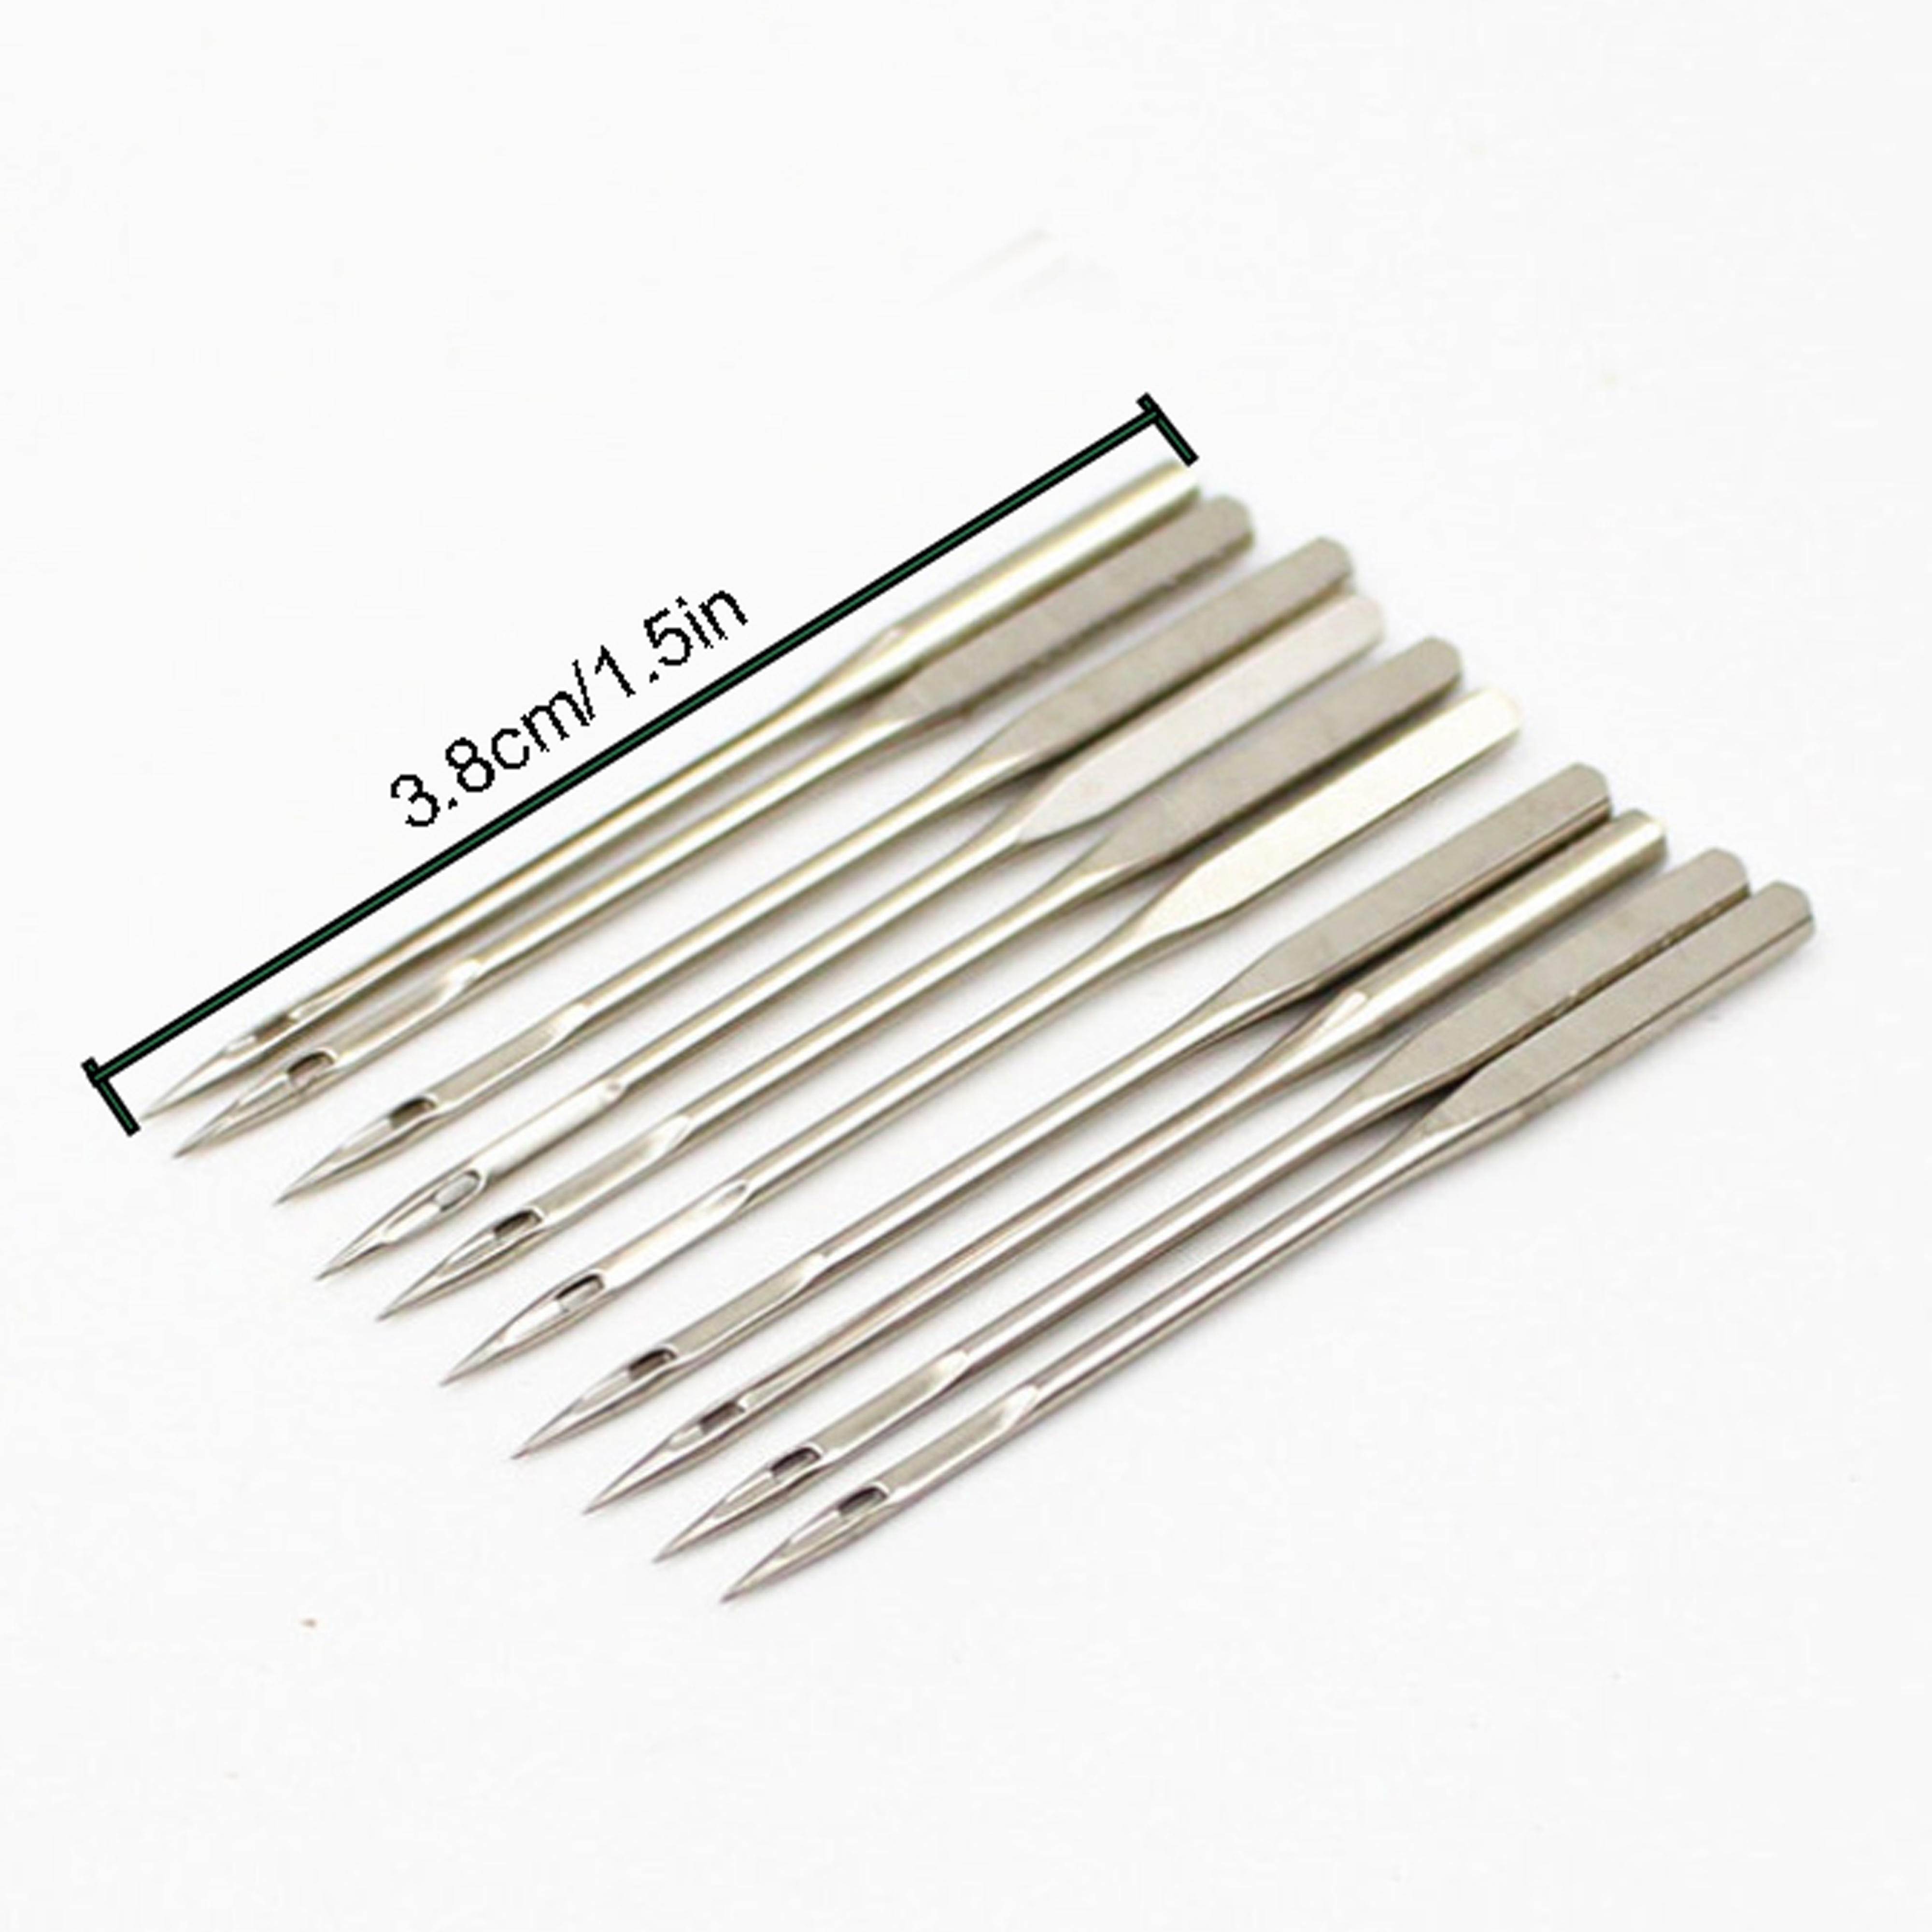 50PCS Sewing Machine Needles For Domestic Home Household  11/75,12/80,14/90,16/1